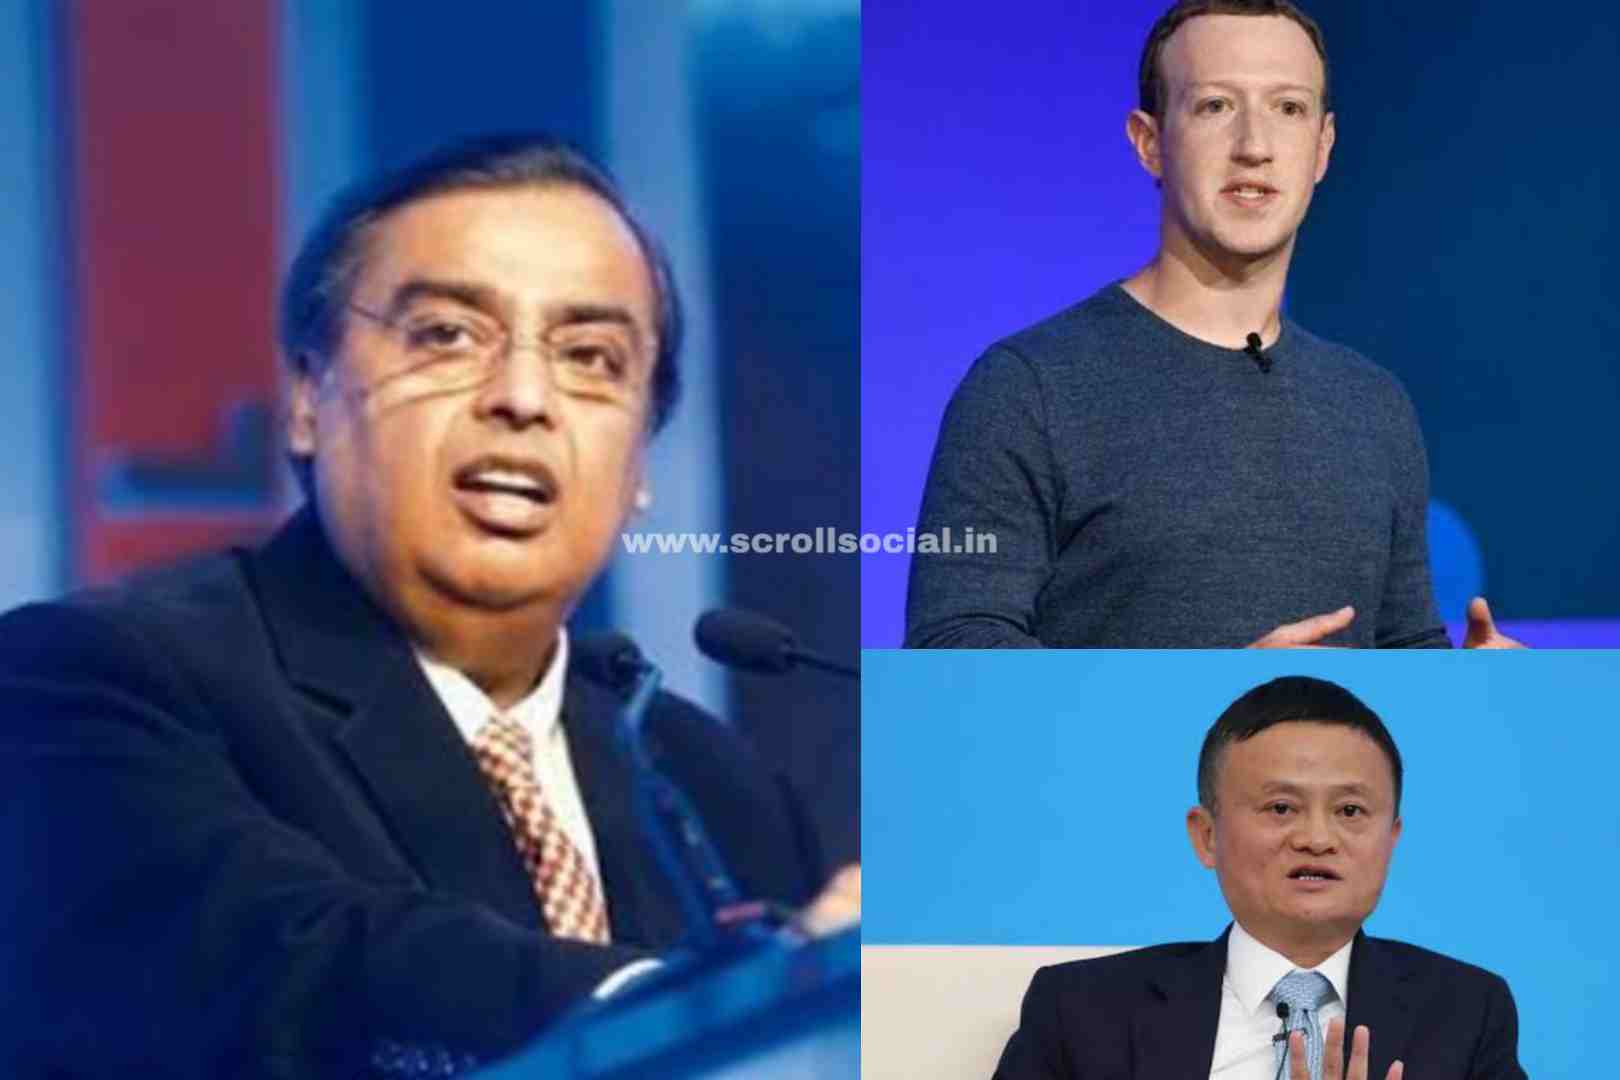 Mukesh Ambani beats Jack Ma as Asia’s richest person after the deal with Facebook